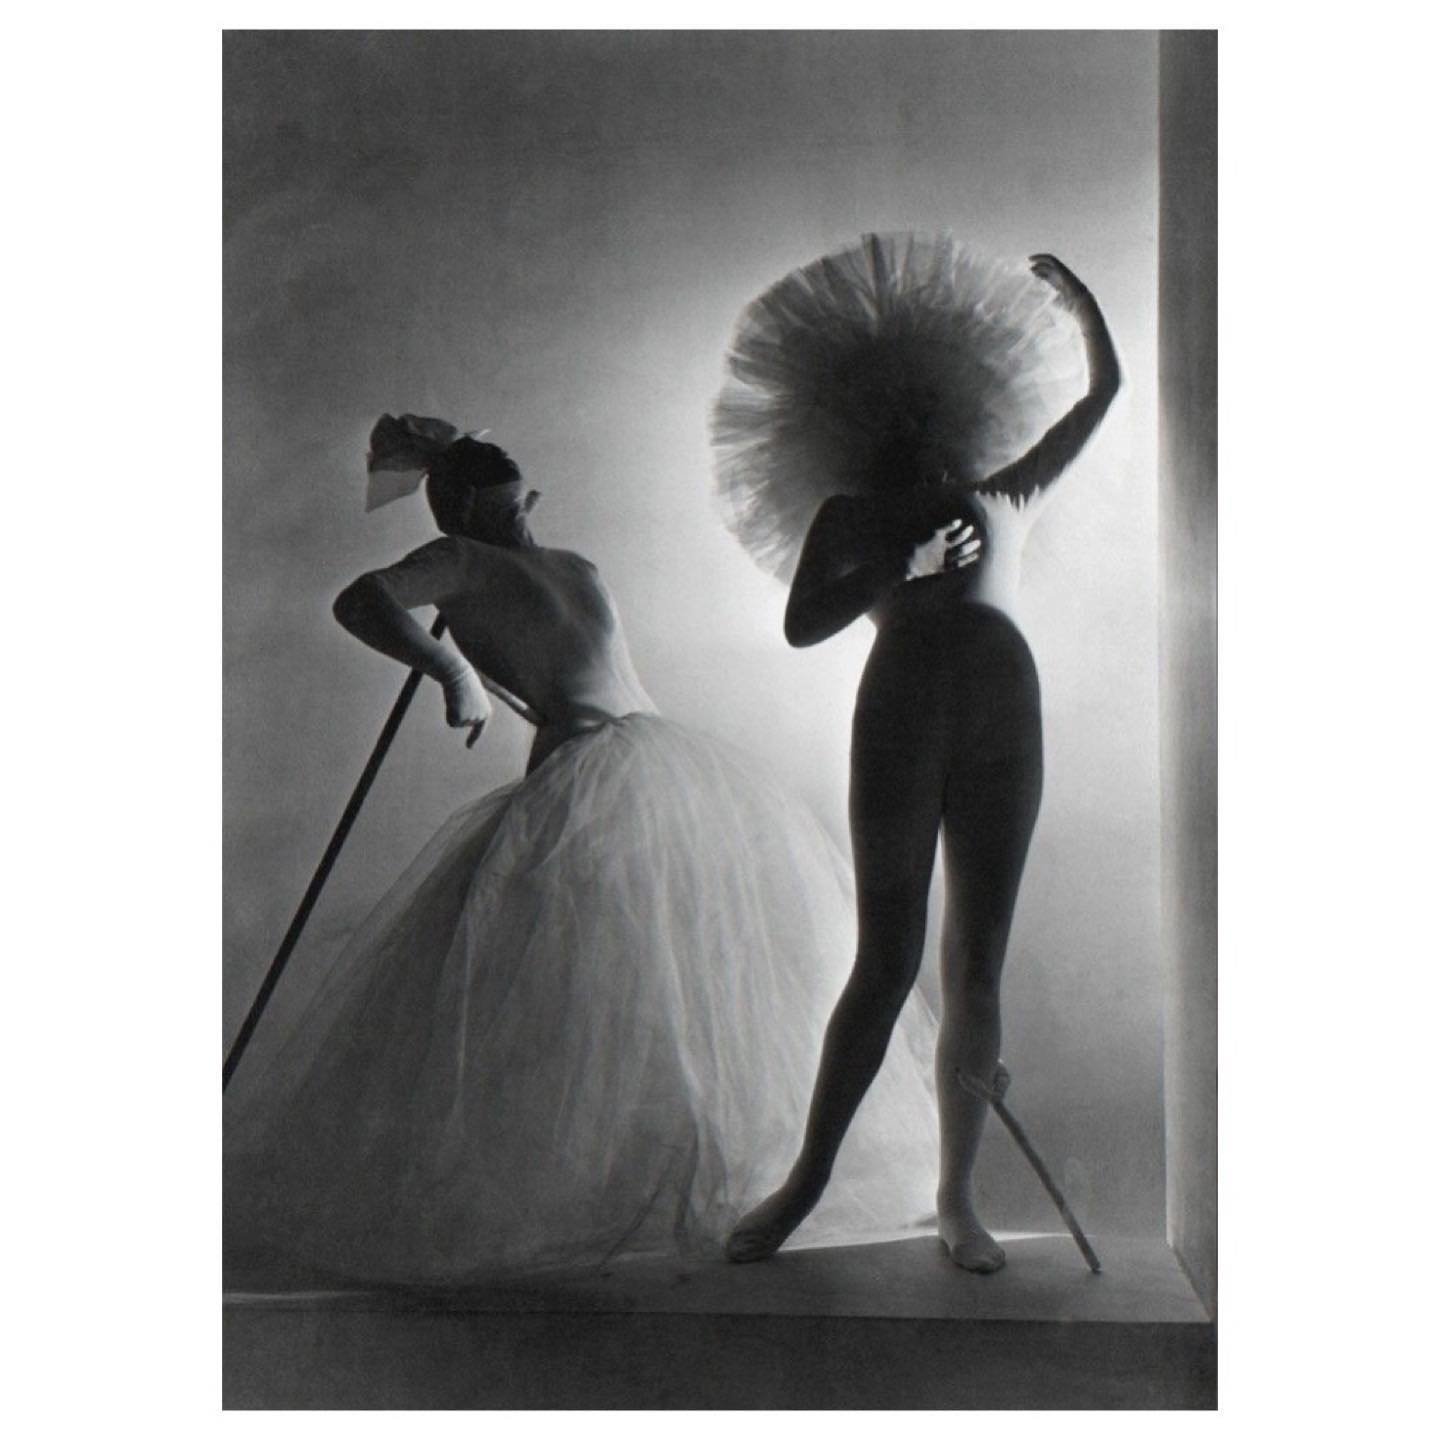 Costumes designed by Salvador Dali, 1939. Photographed by Horst P Horst

I have def posted this pic before and will def do it again

#dali #horstphorst